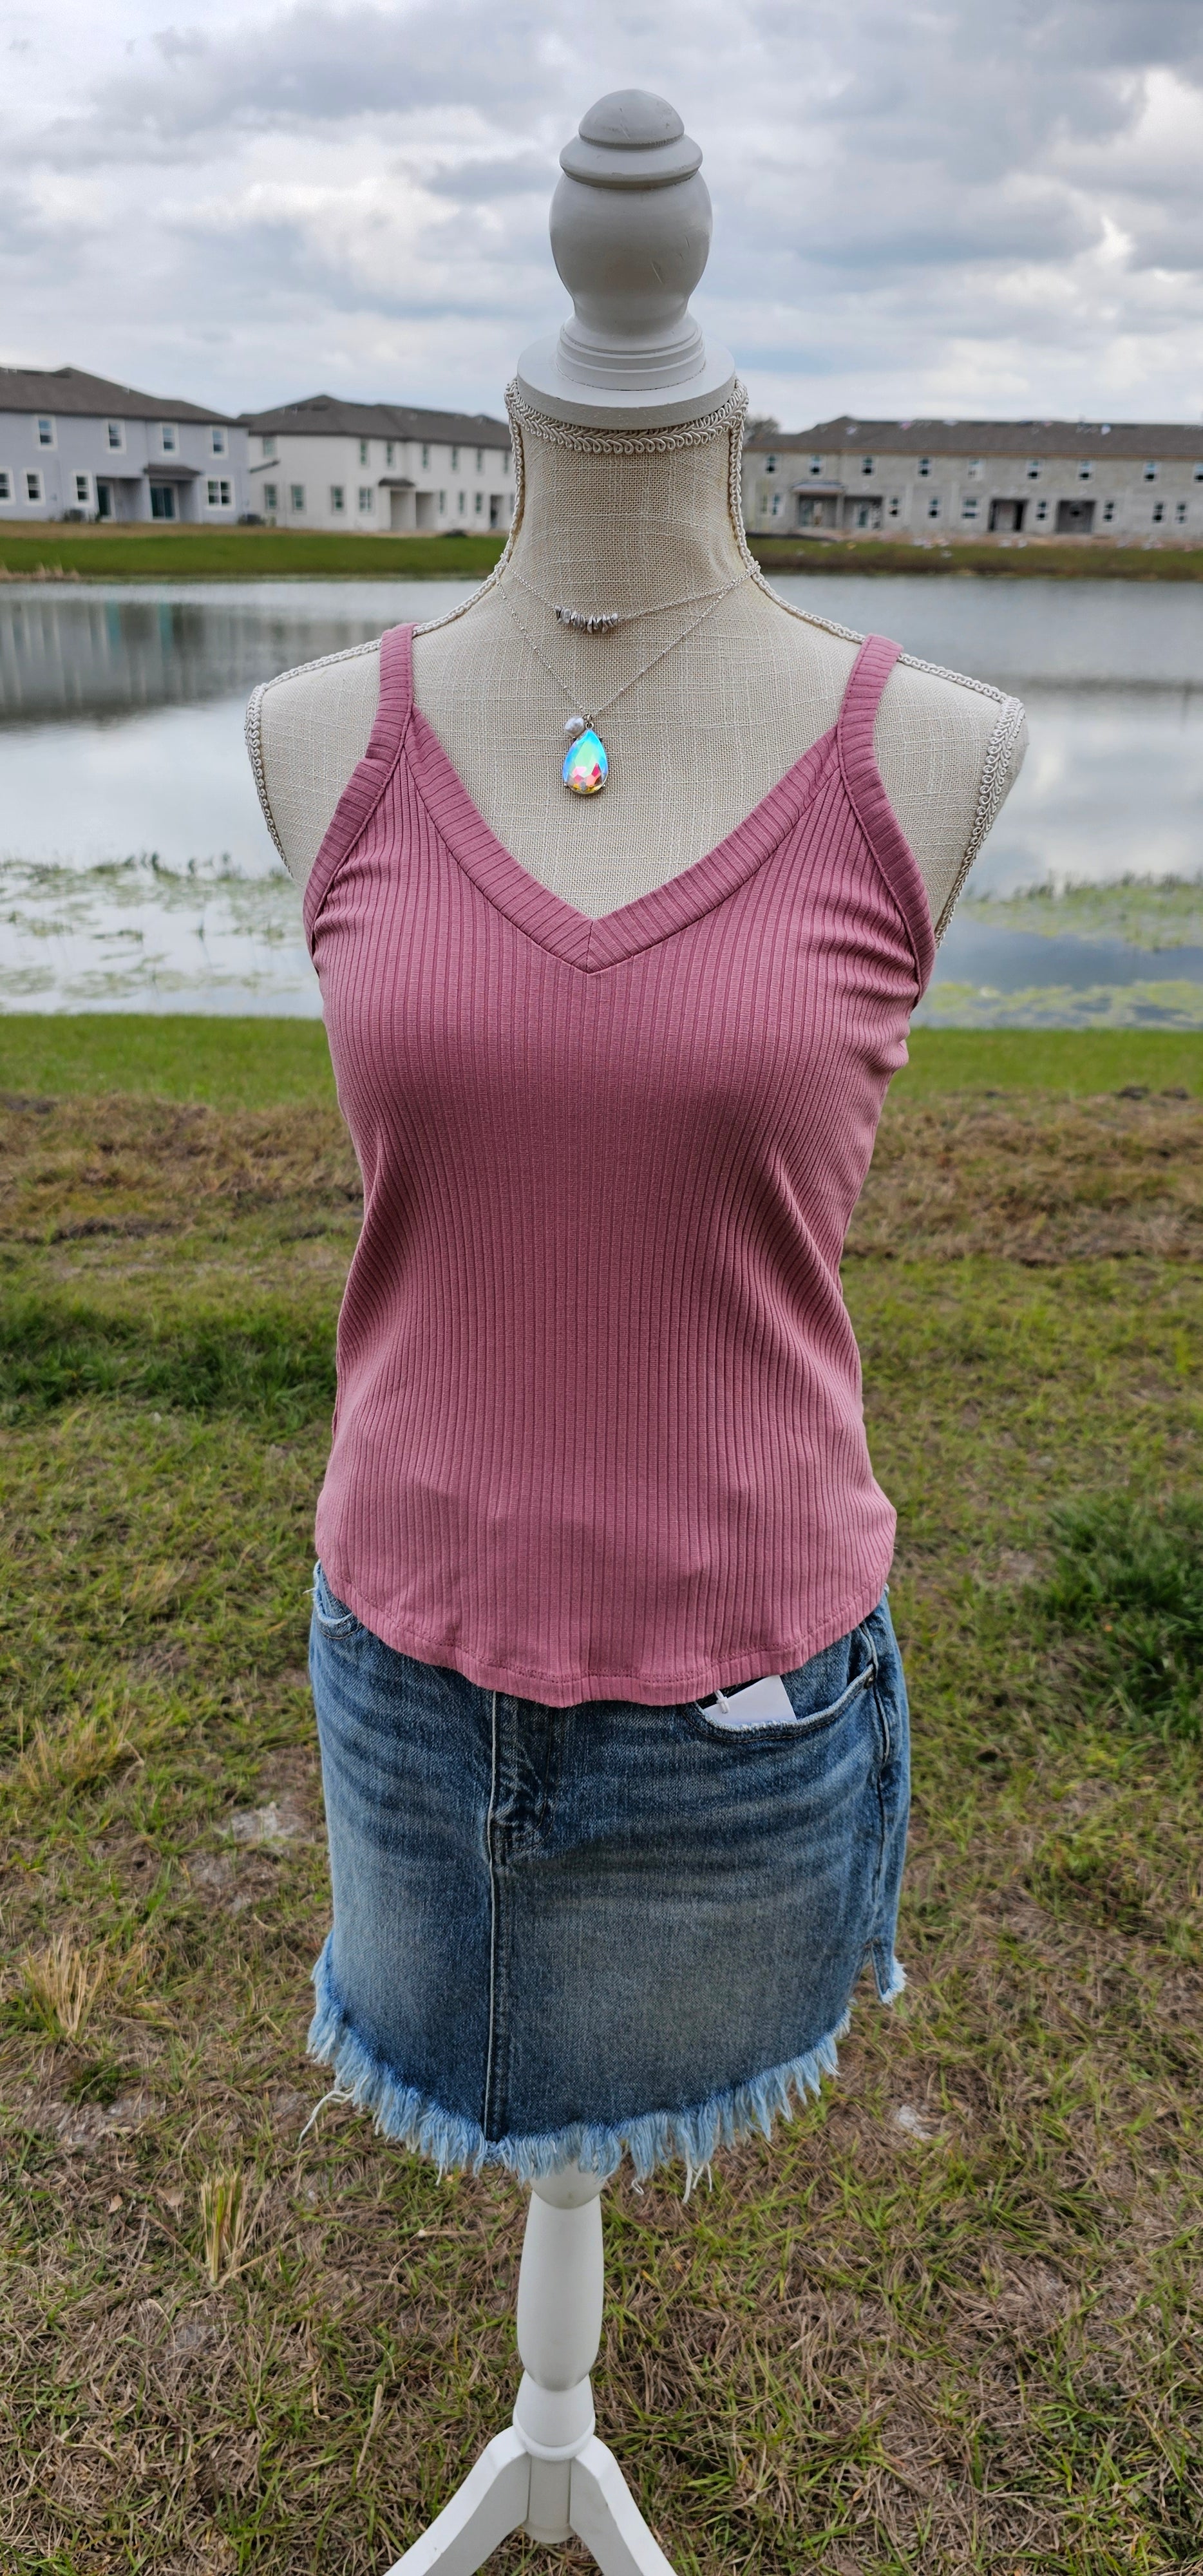 This “Basic Babe Tank Top: Dusty Rose” features a ribbed fabric, sleeveless tank top with v-neck and back. This is a great basic staple piece! Sizes small through x-large.